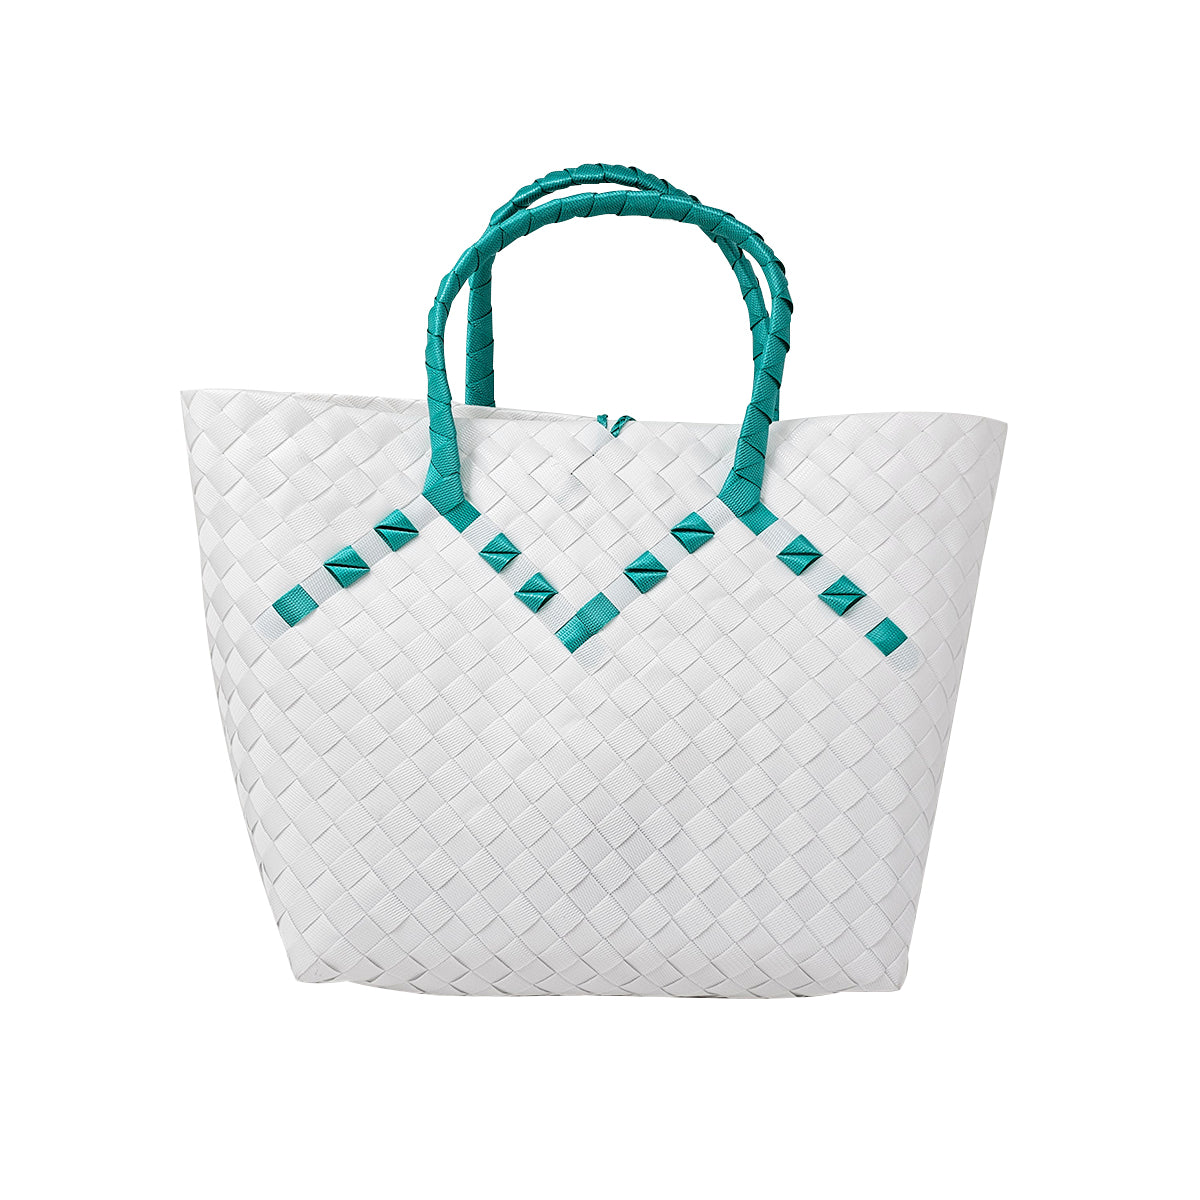 Misenka Handicrafts Philippine Bayong Pearl White Mint Green Classic Two Tone Bag - SALE 50% OFF